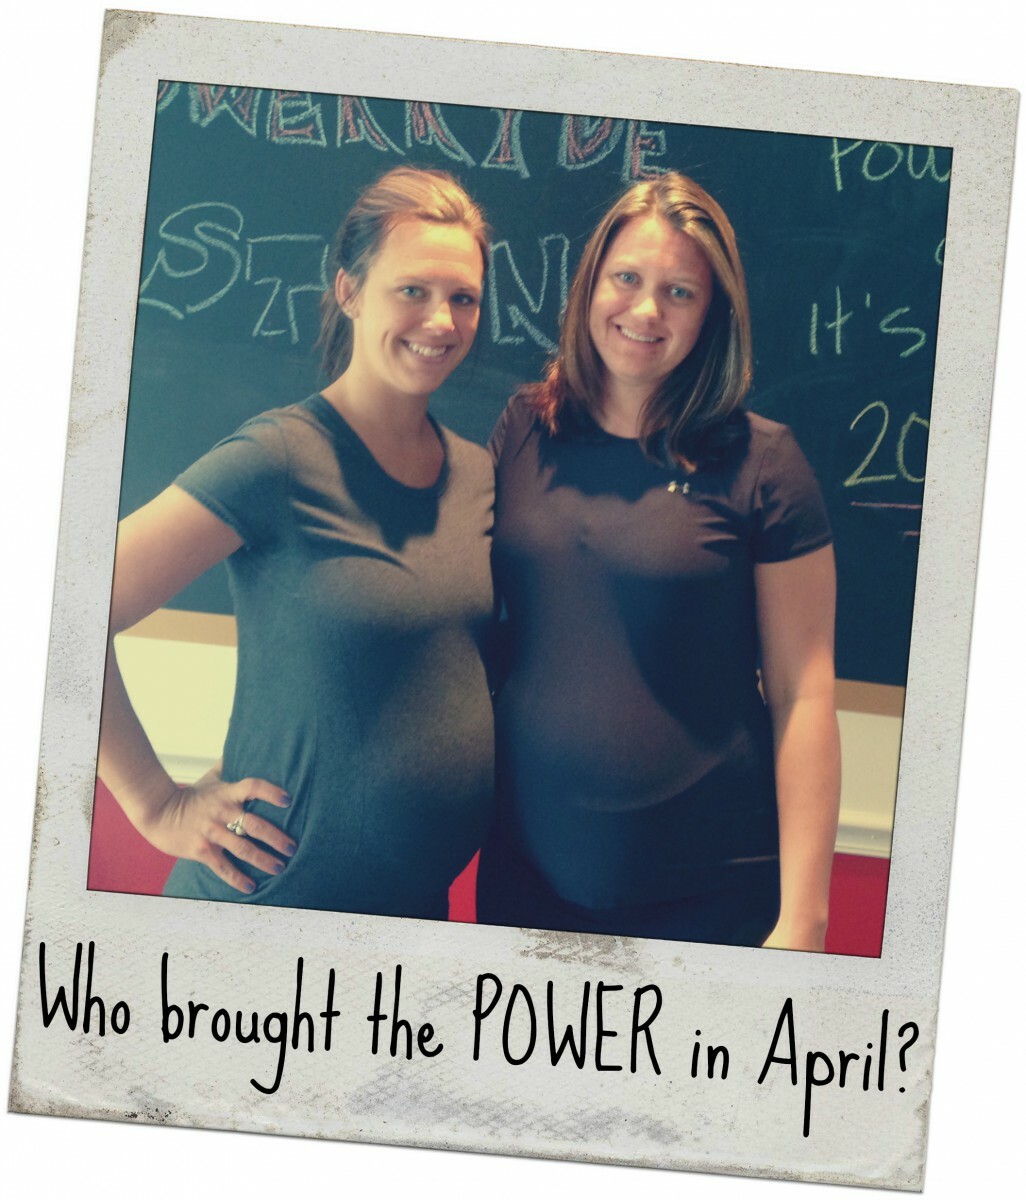 Polaroid style picture of Kelly Barnhart and Stephanie Leach with 'Who Brought the POWER in April'?